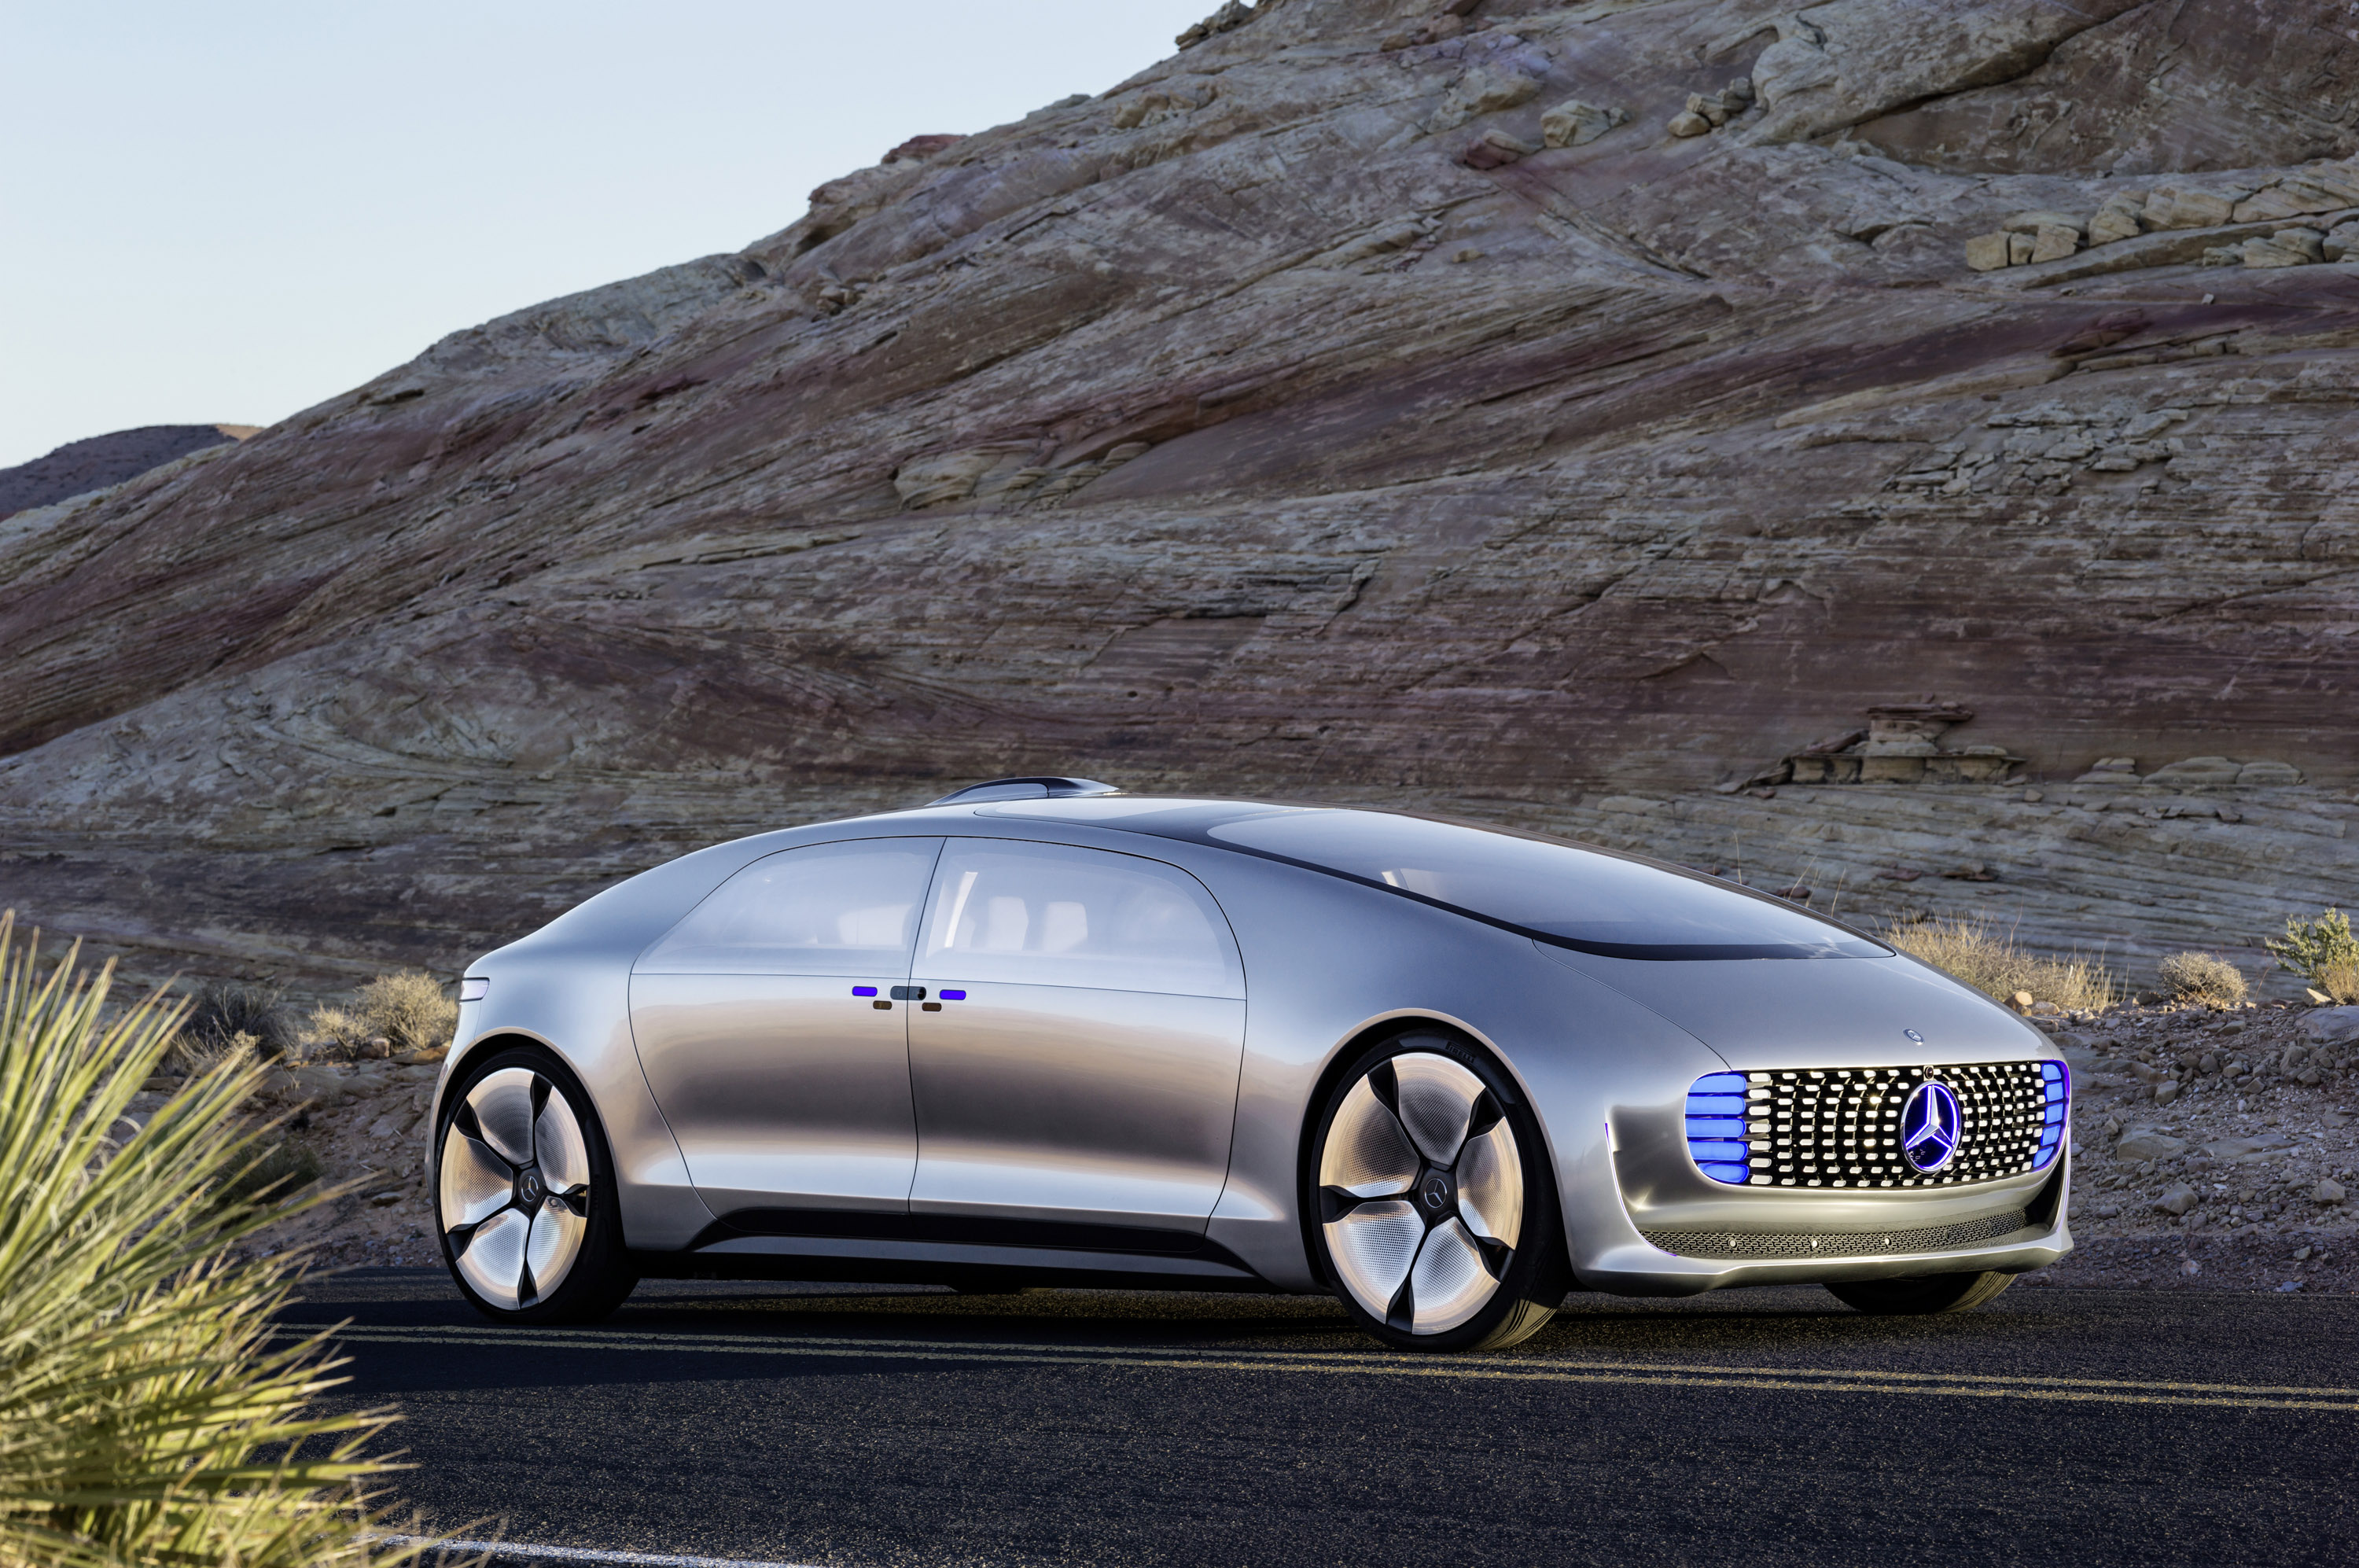 Mercedes-Benz F015 Luxury in Motion Concept photo #1